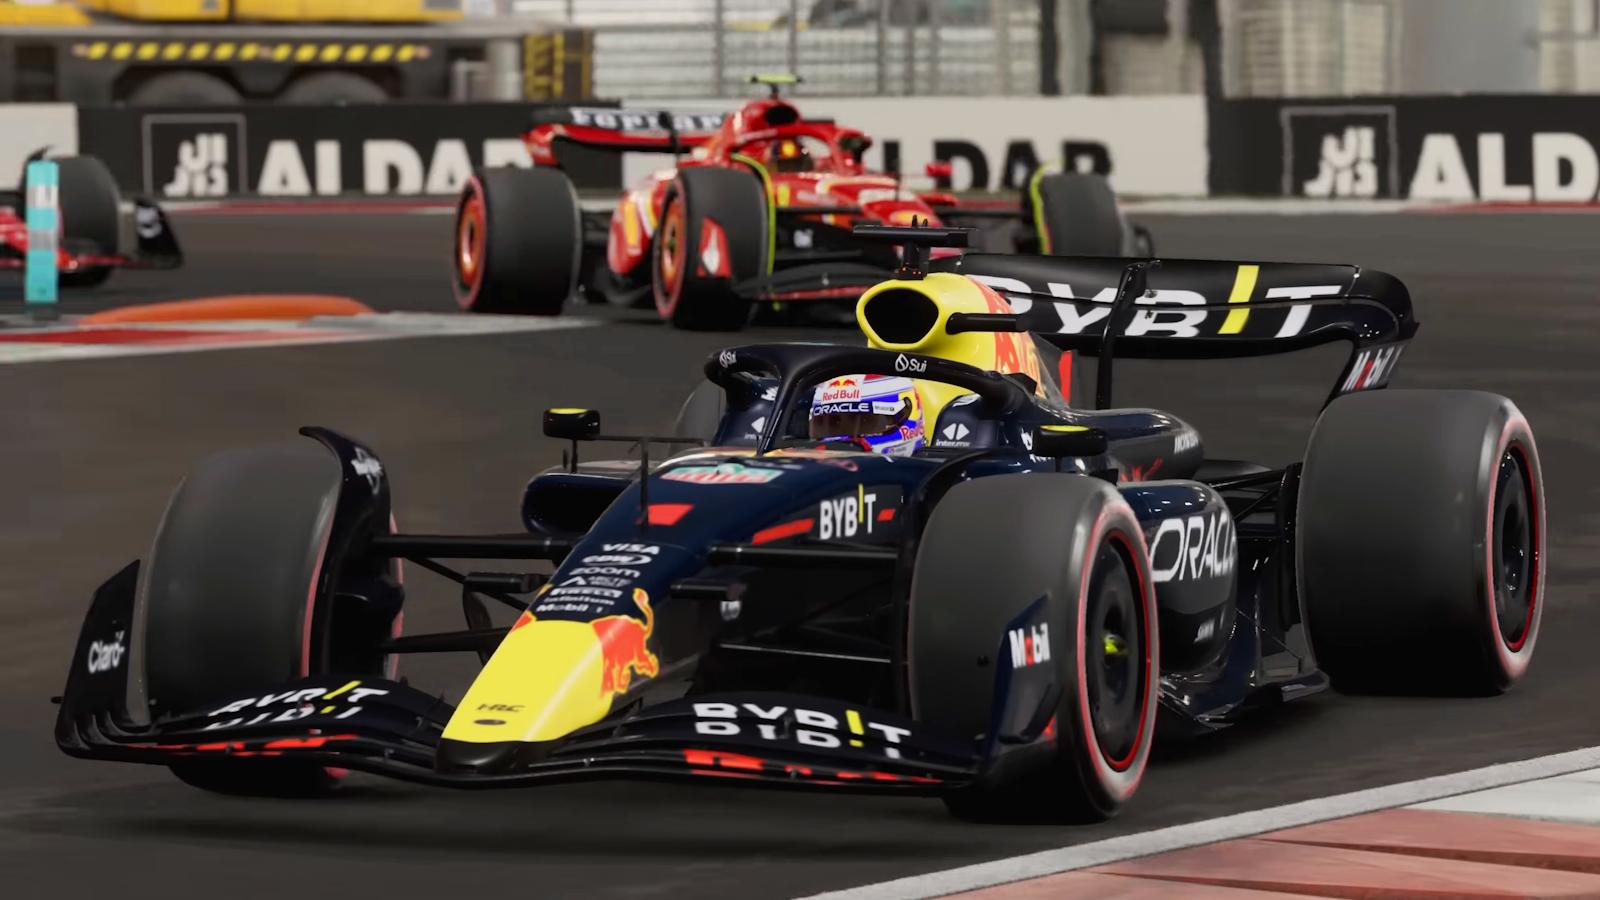 Red Bull F1 car racing around track with Ferrari trailing in background.